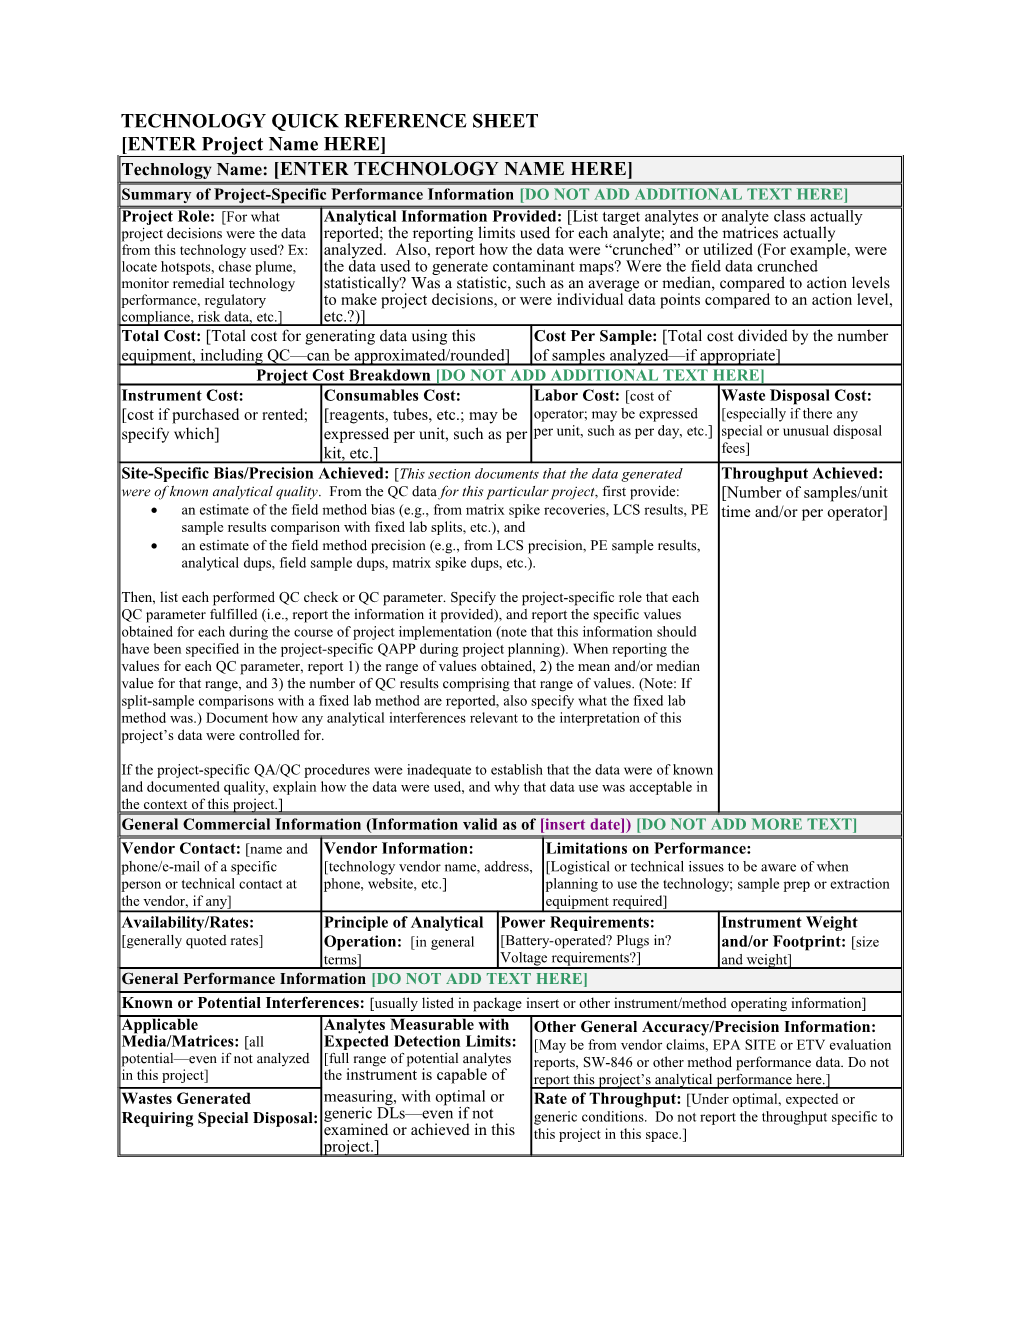 Technology Quick Reference Sheet